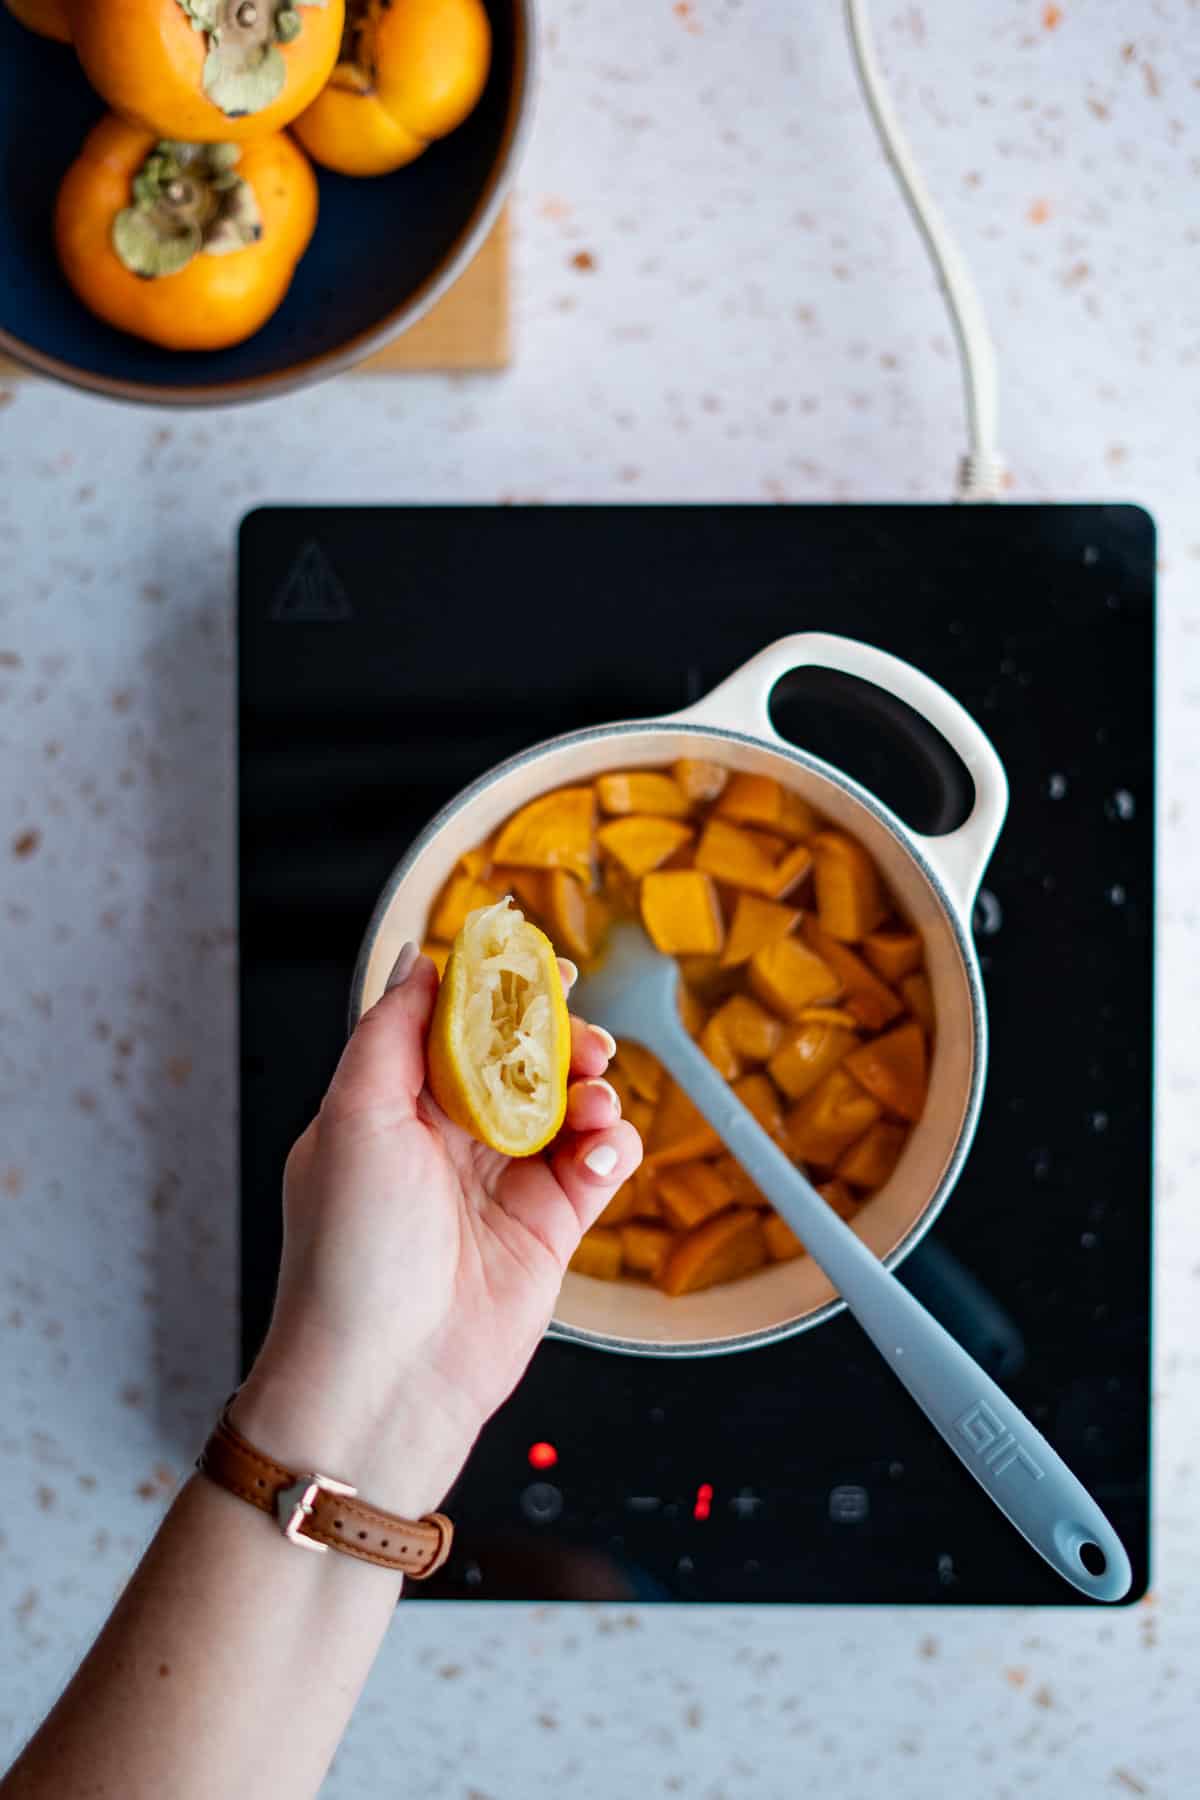 A hand from out of frame is squeezing a lemon into a saucepan of simmering persimmon simple syrup.